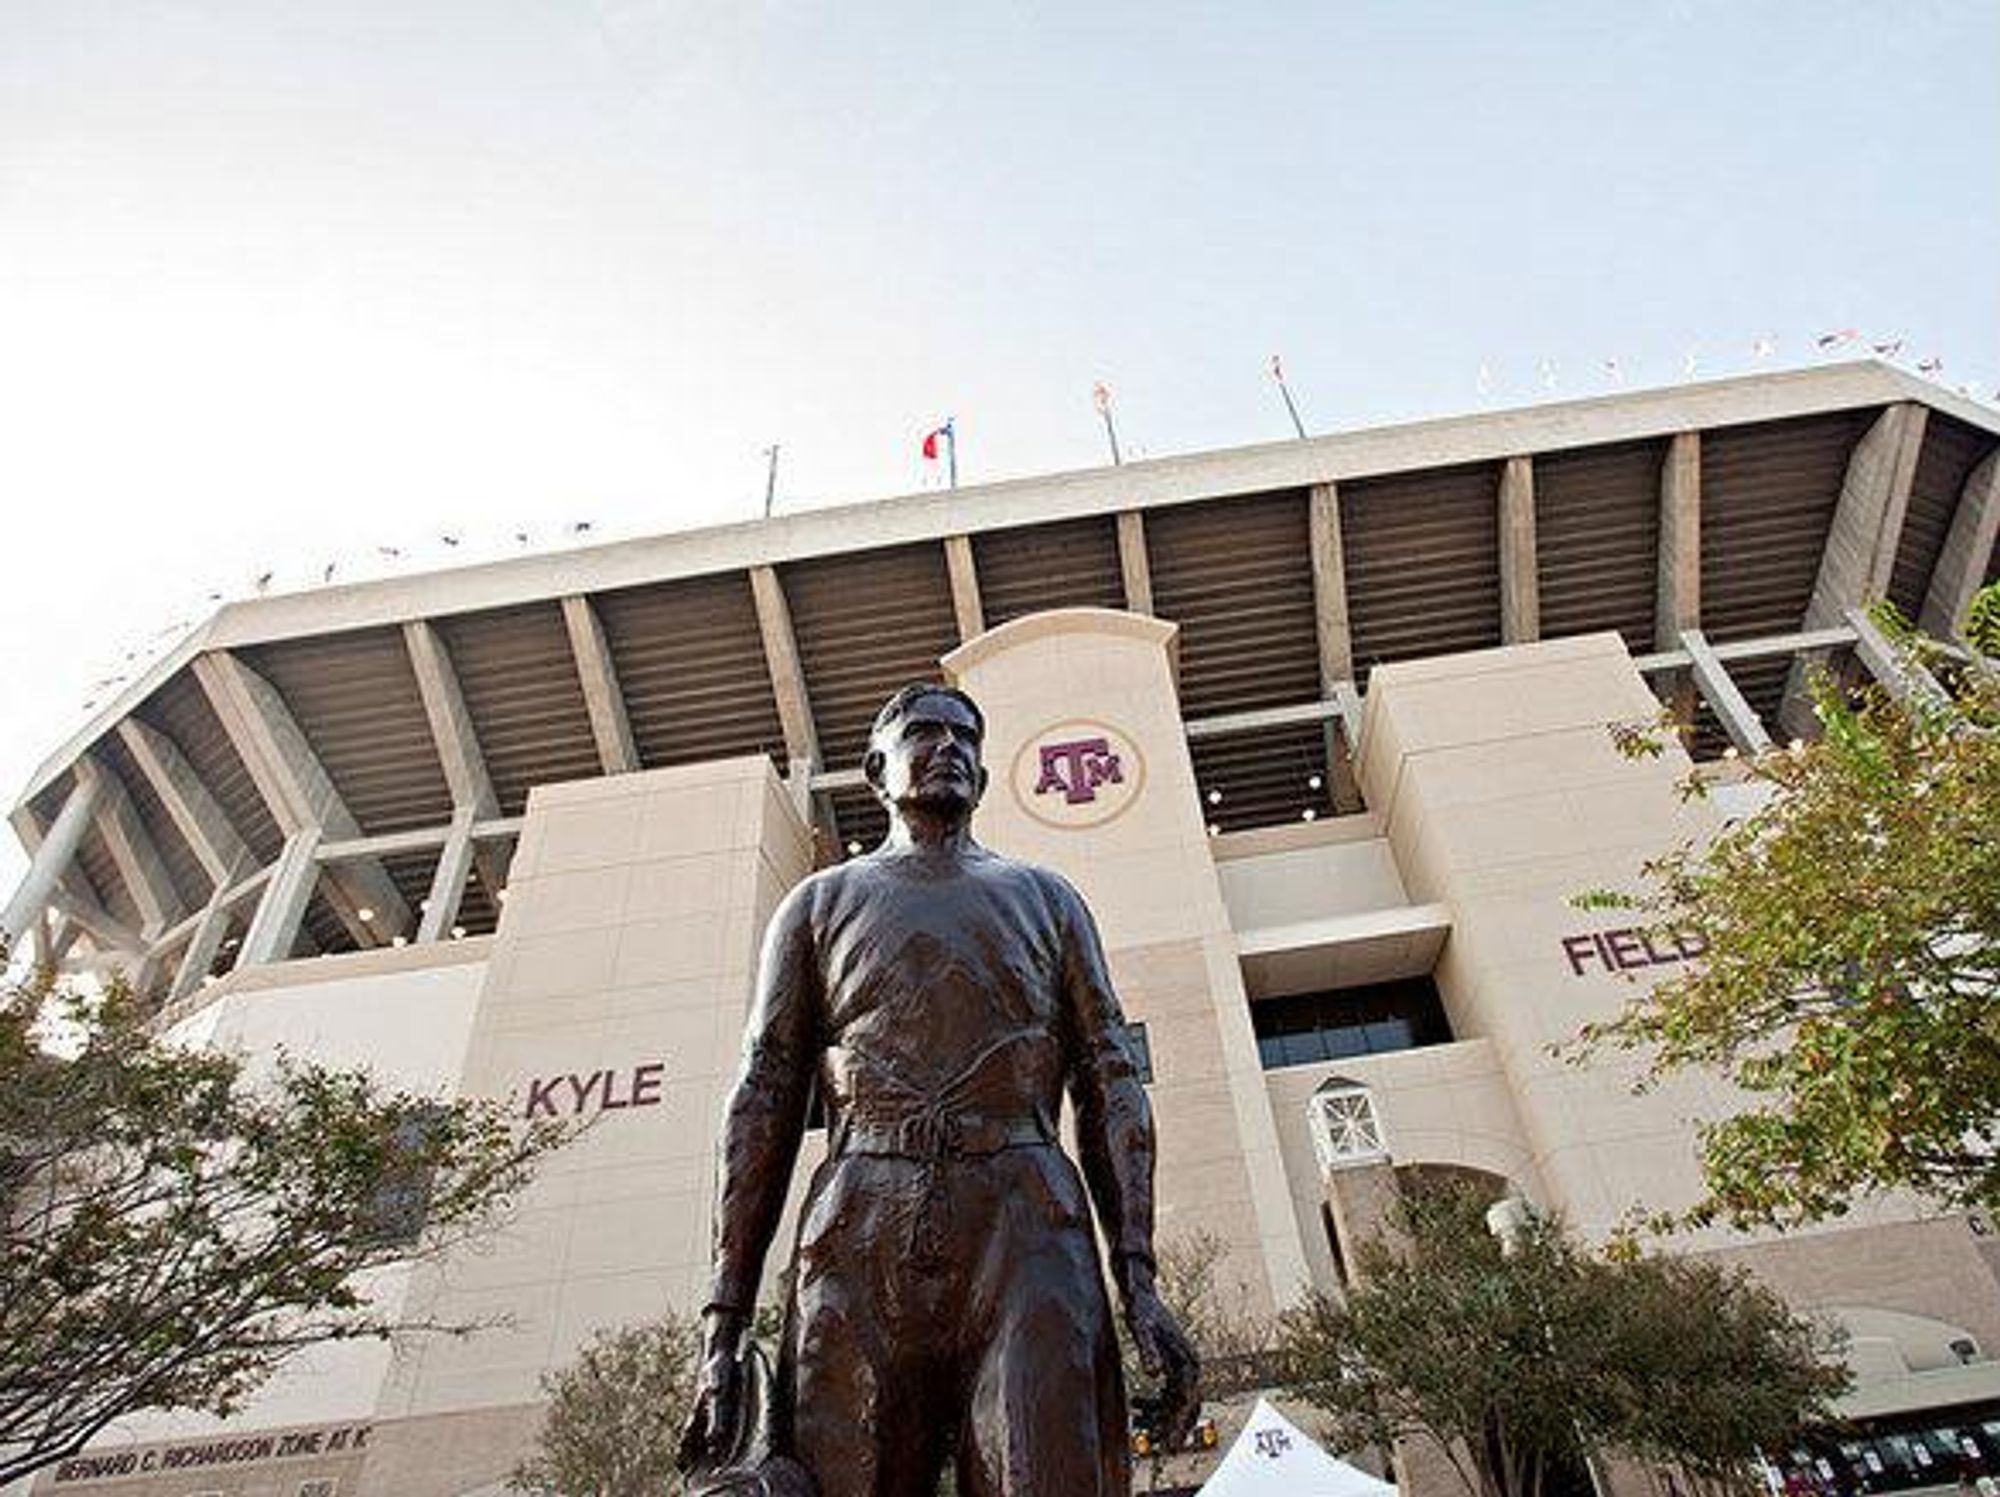 12th Man statue of E. King Gill in front of Kyle Field at Texas a&m cropped